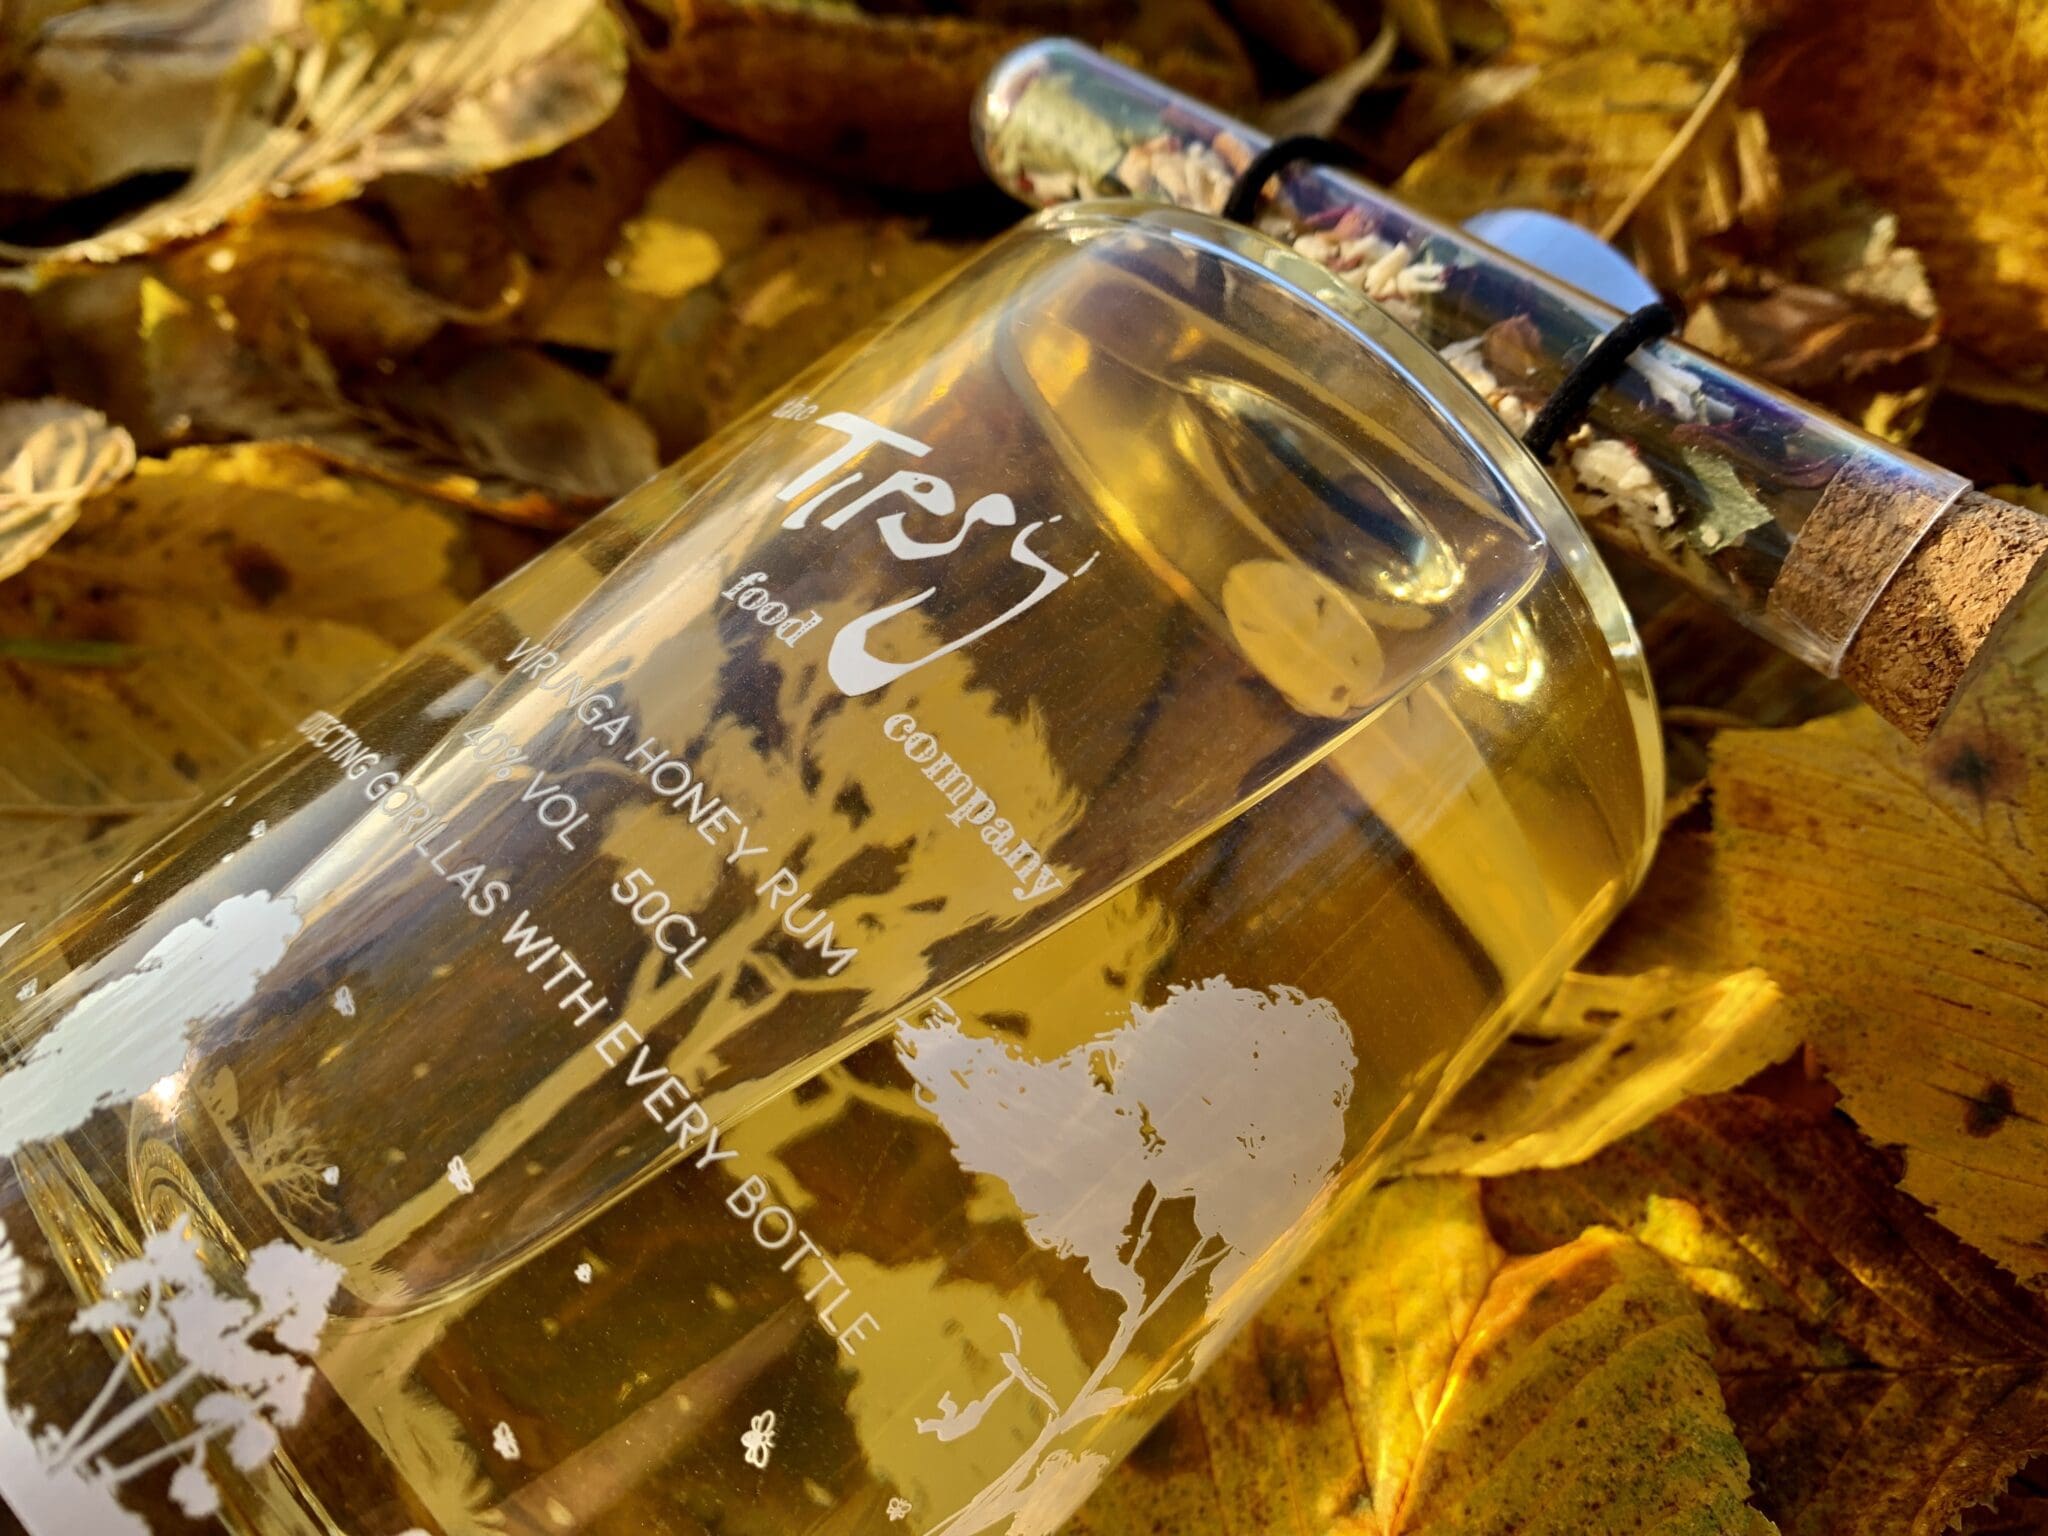 A bottle of perfume sitting on a pile of leaves.